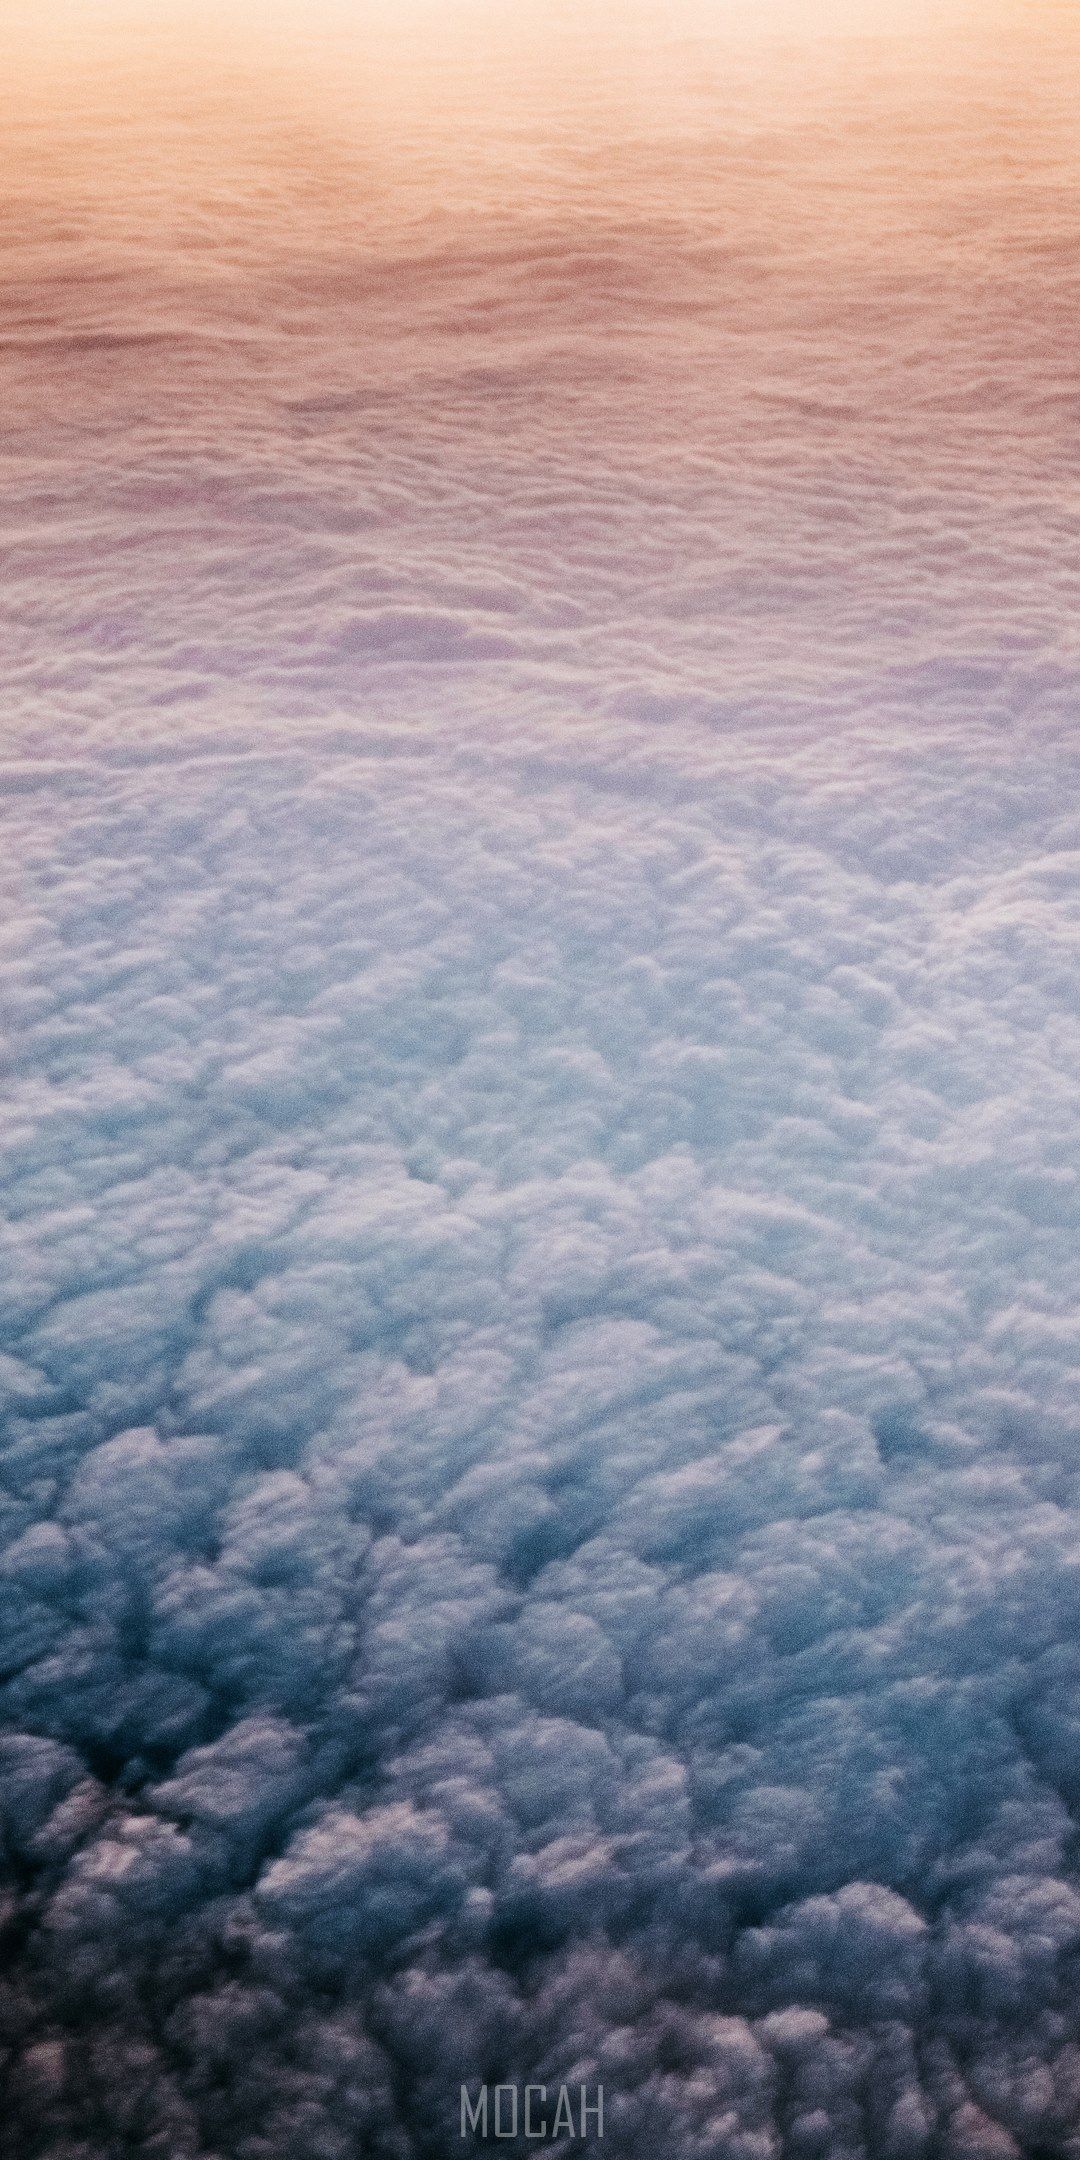 above the clouds, OnePlus 5T full HD wallpaper, 1080x2160 Gallery HD Wallpaper